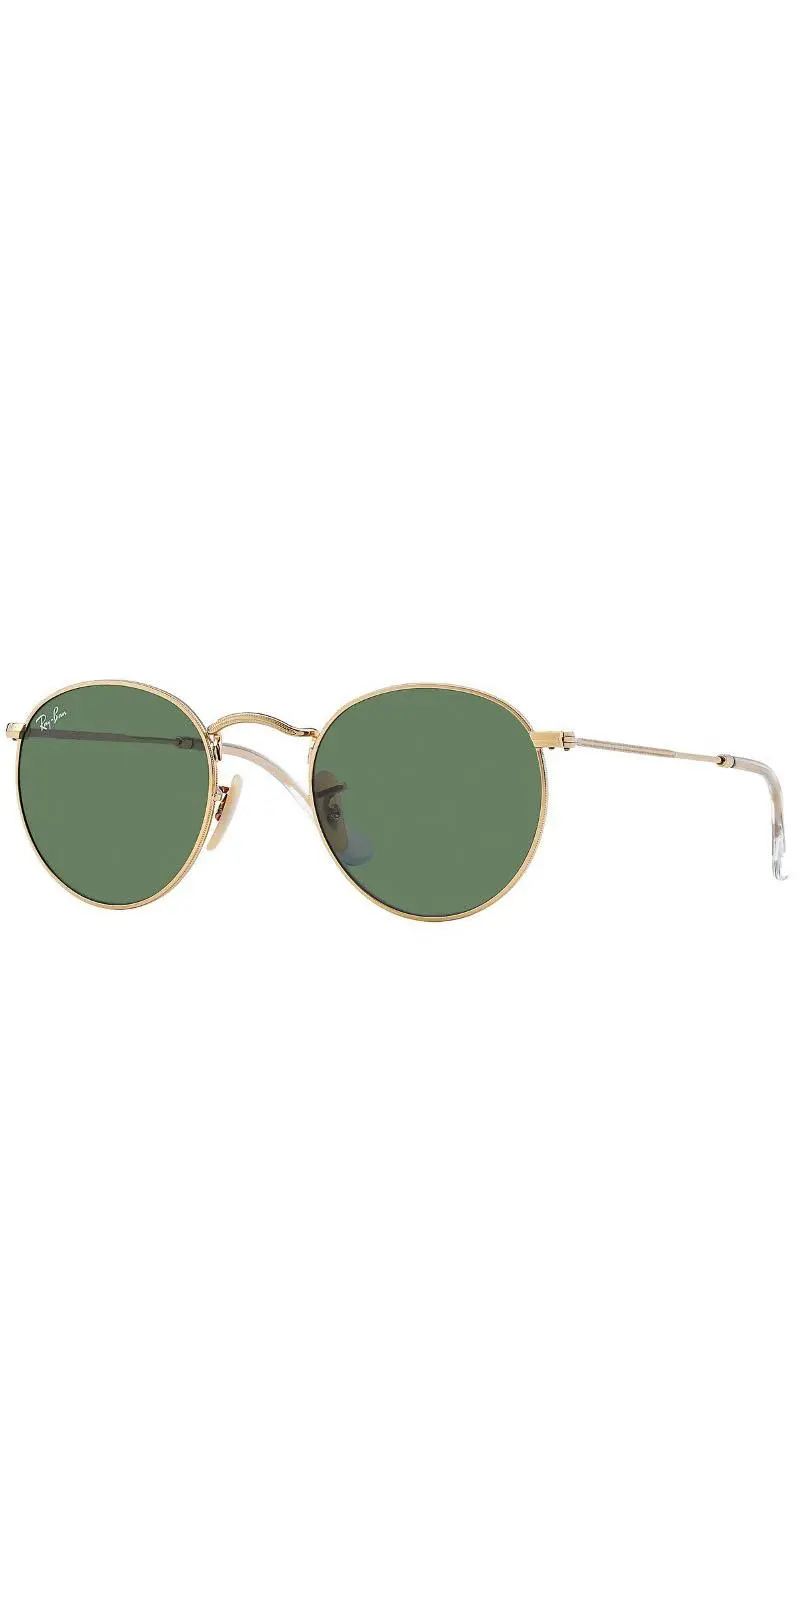 Ray-Ban RB3515 Sunglasses | LensCrafters